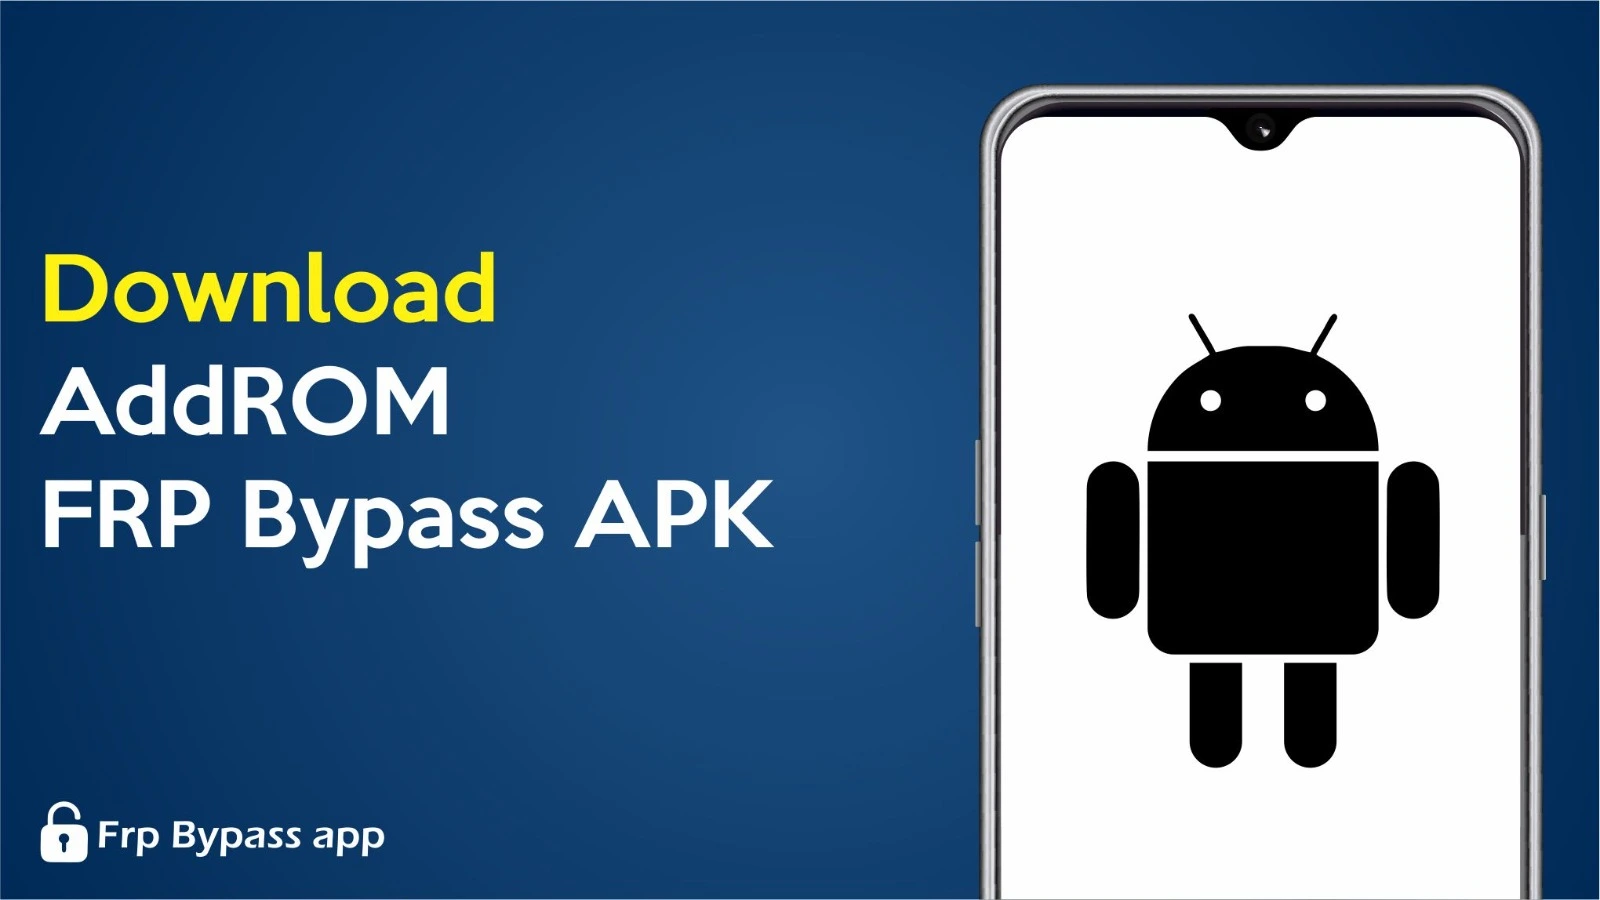 addrom frp bypass apk download image